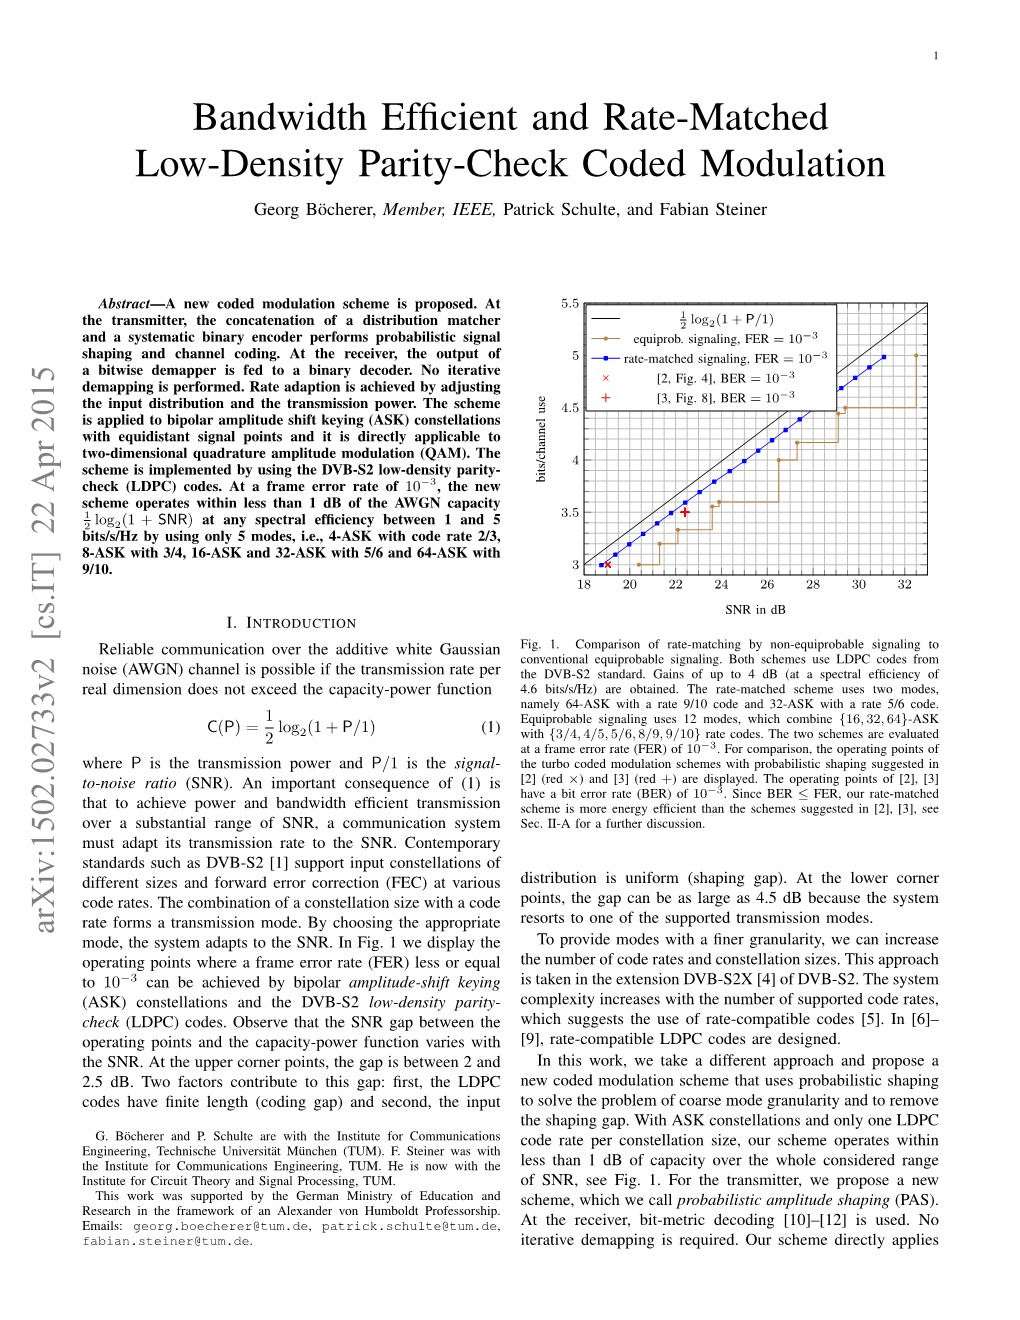 Bandwidth Efficient and Rate-Matched Low-Density Parity